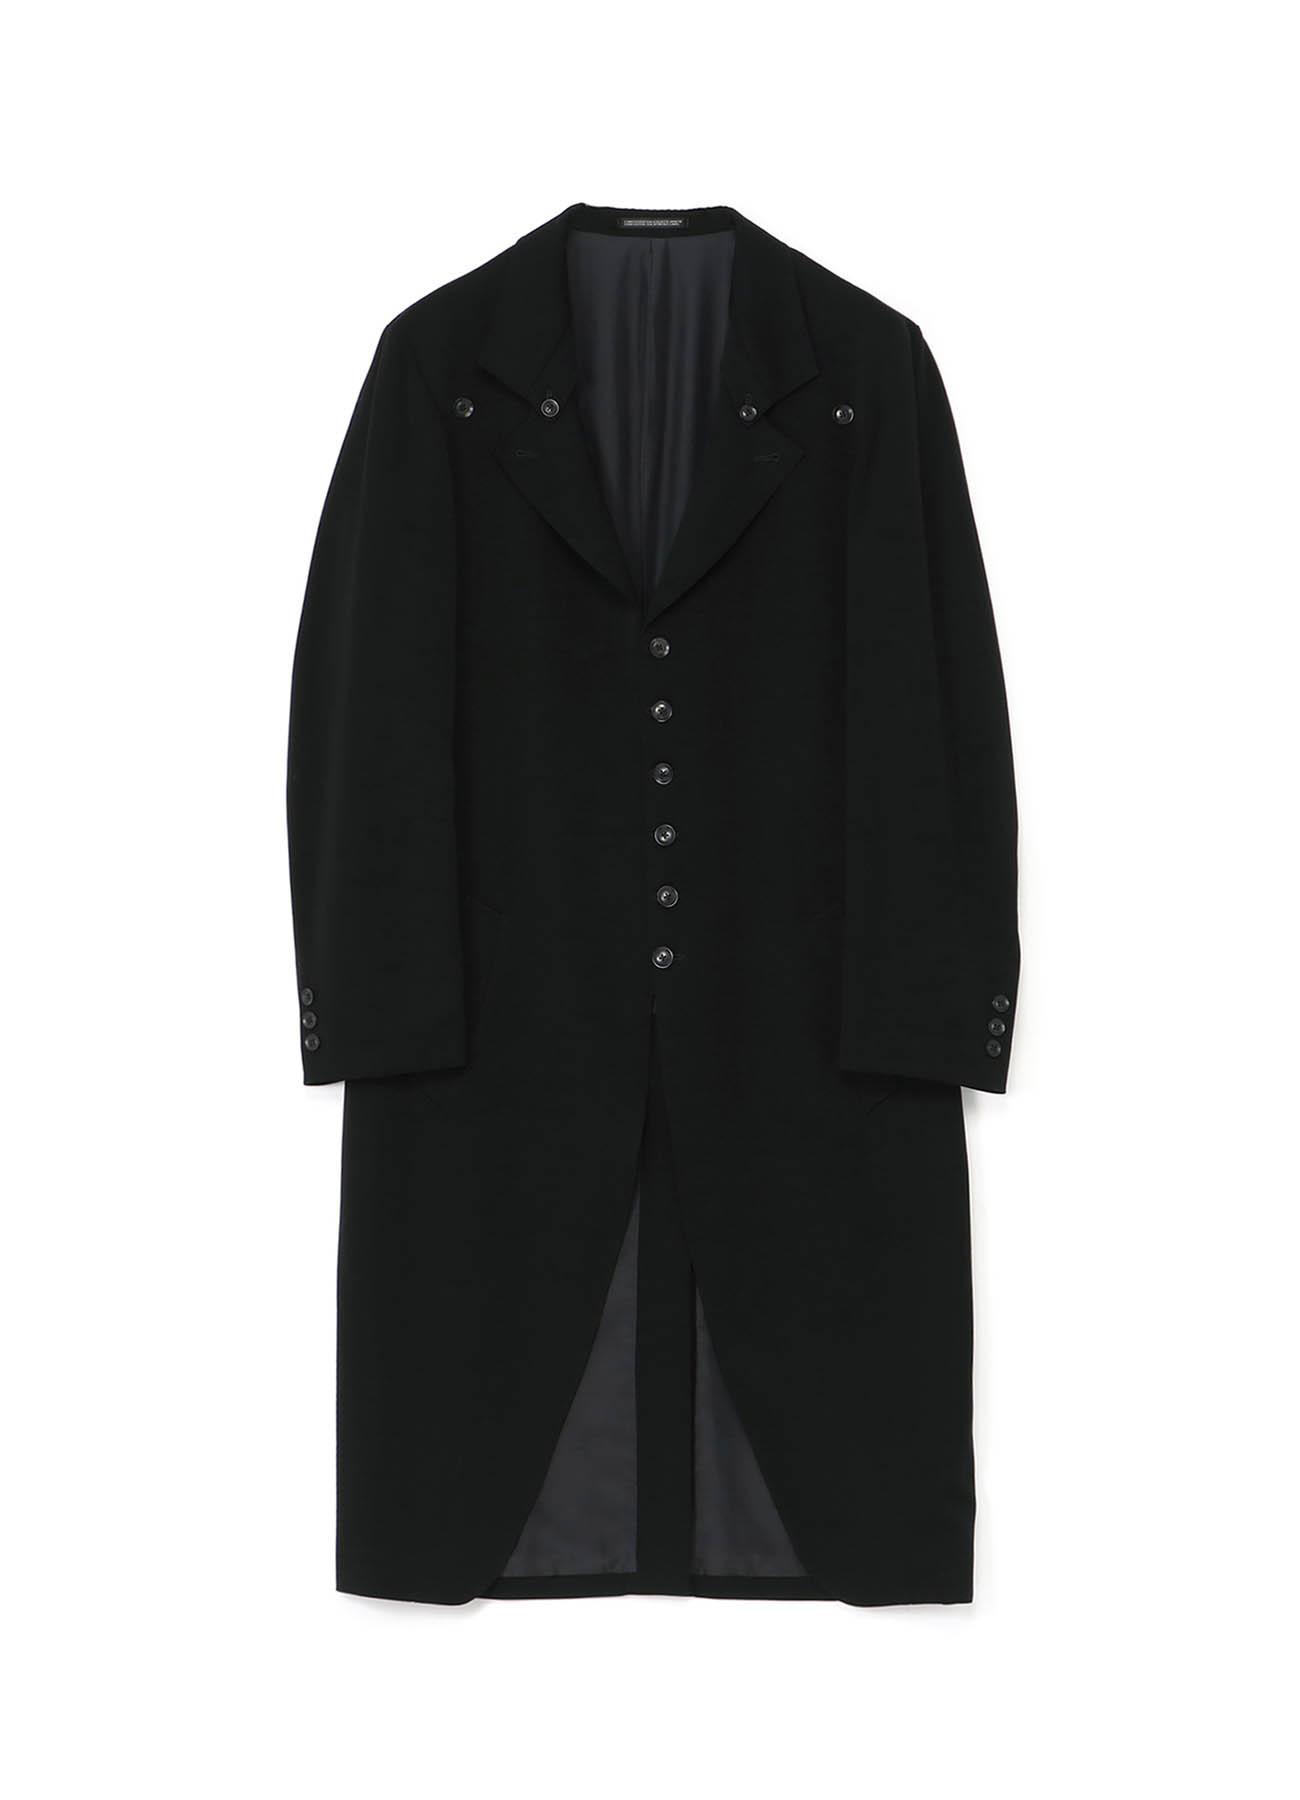 【8/24 10:00(JST) Release】WOOL TUXEDO FRONT BUTTING 6BUTTONS JACKET